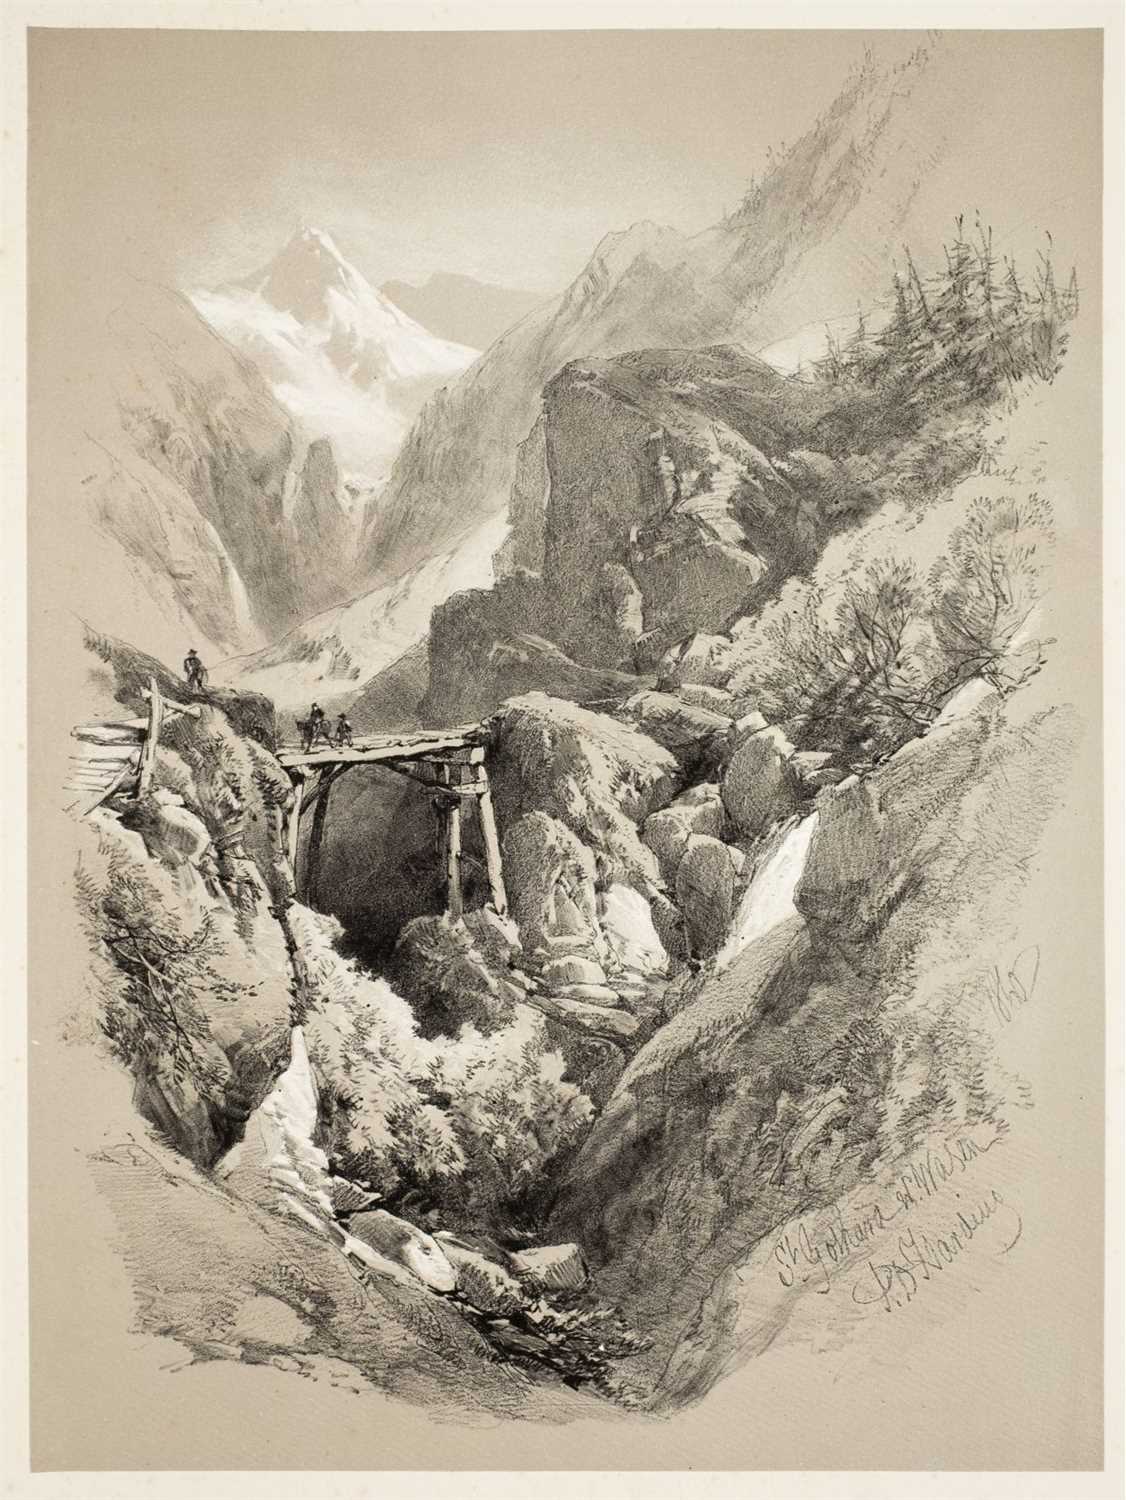 Lot 81 - Harding (James Duffield). Picturesque Selections: Drawn on Stone by J. D. Harding, [1861]